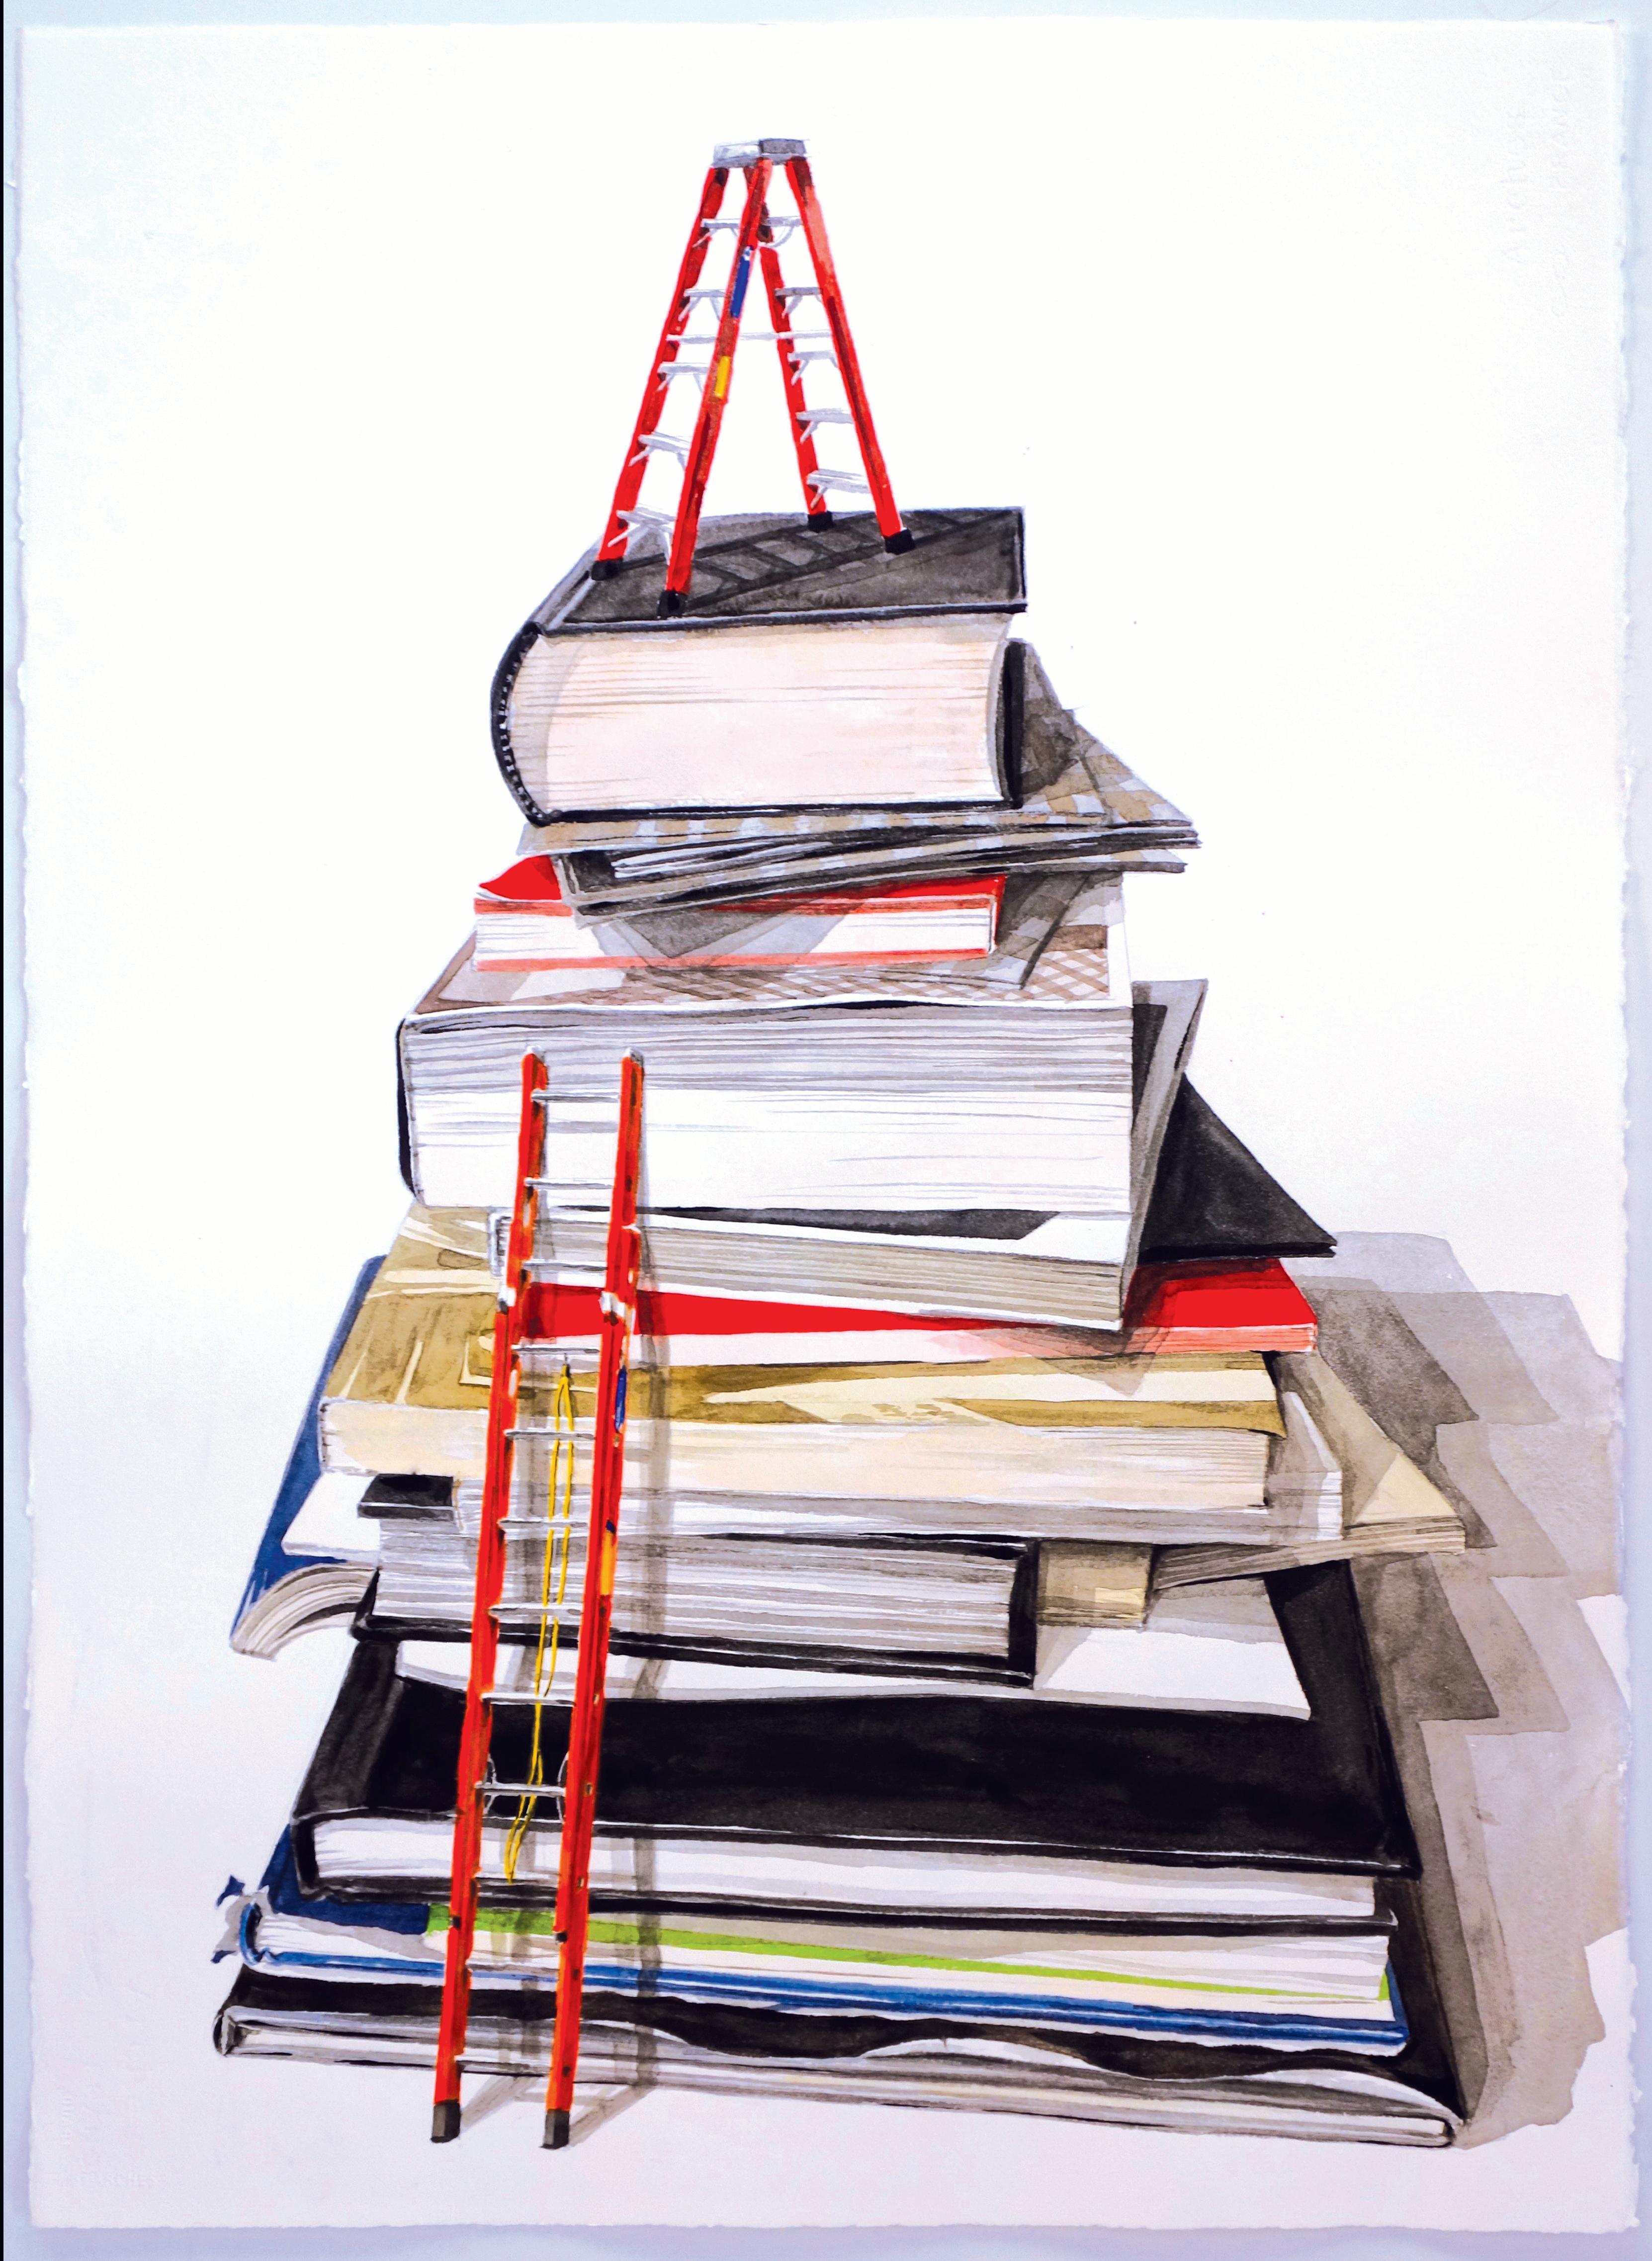 Thomas Broadbent Still-Life Painting - "Beyond Reach" Surrealist Still Life Painting of books with ladders